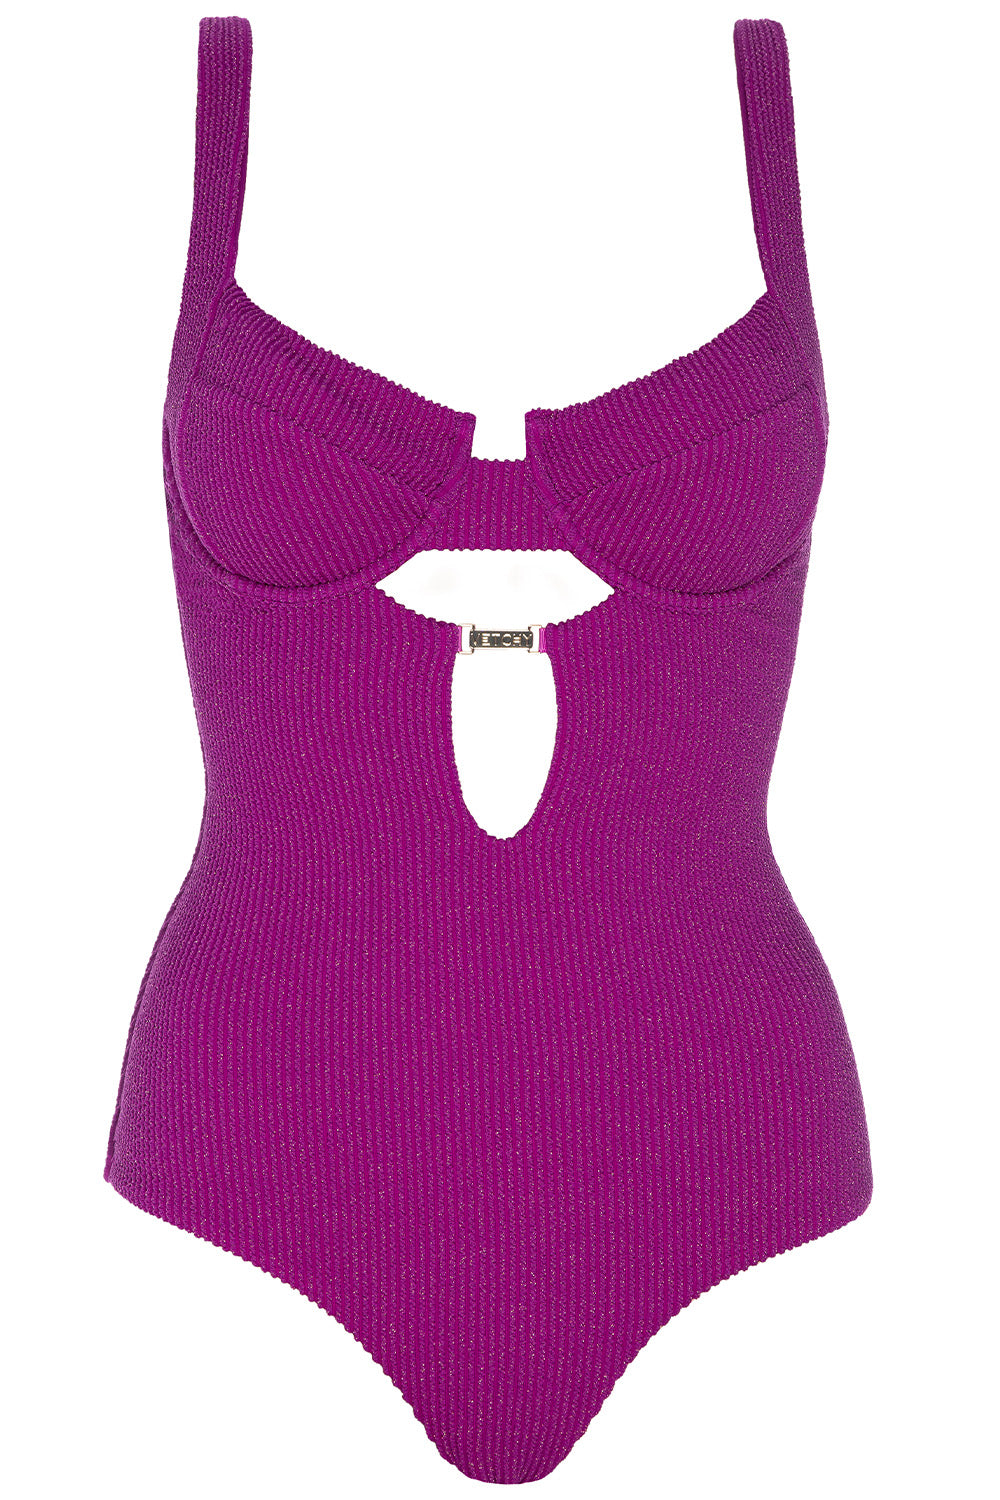 Front view of the Stellar berry swimsuit on a white background